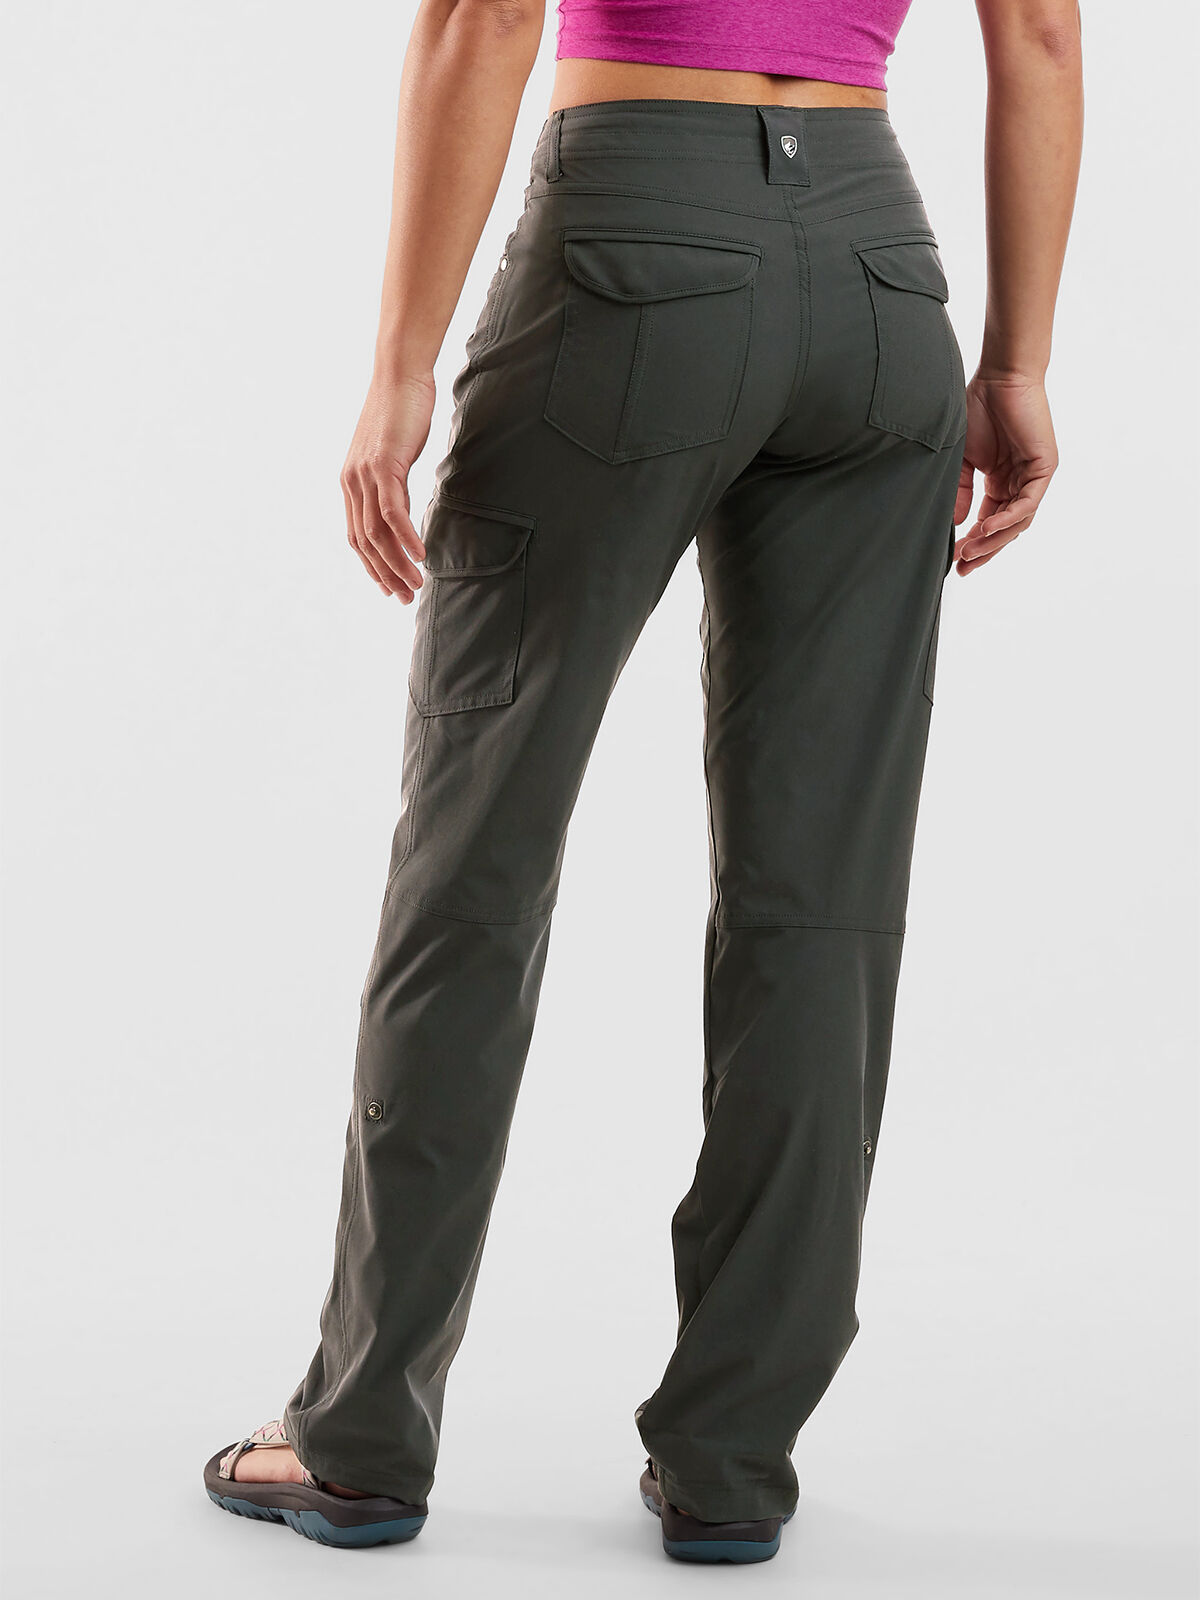 Top 5 Comfortable Hiking Pants for Petite Women  Get that Perfect Fit